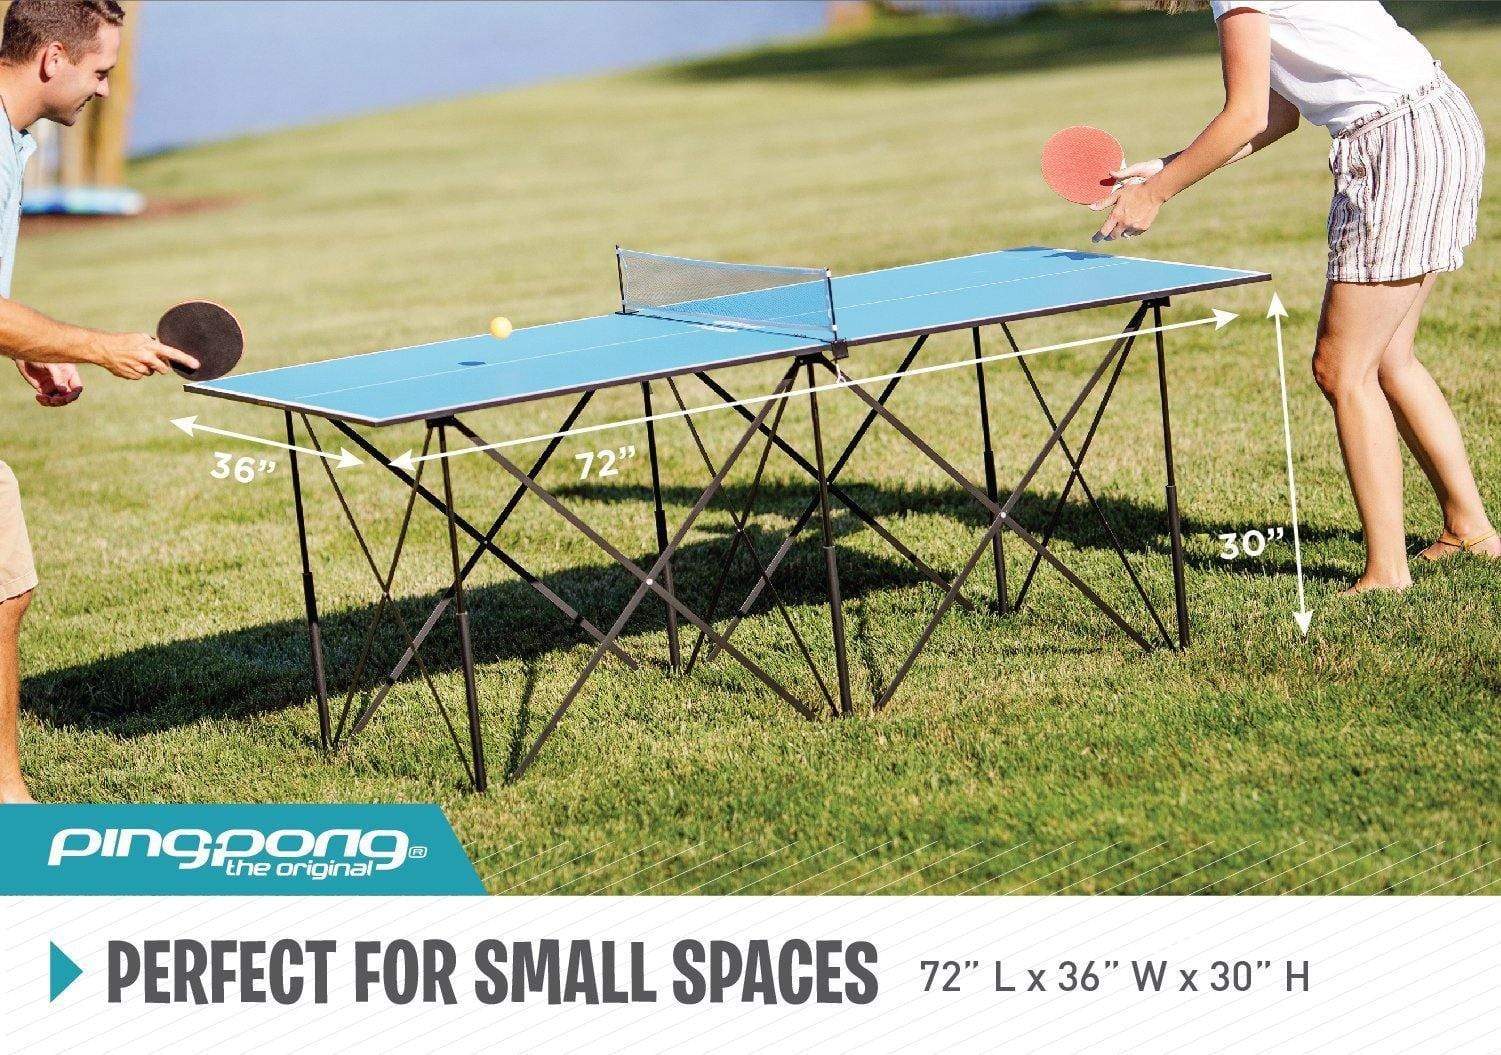 PING PONG Table Tennis PING PONG - 6' Pop Up Table Tennis - T8466W